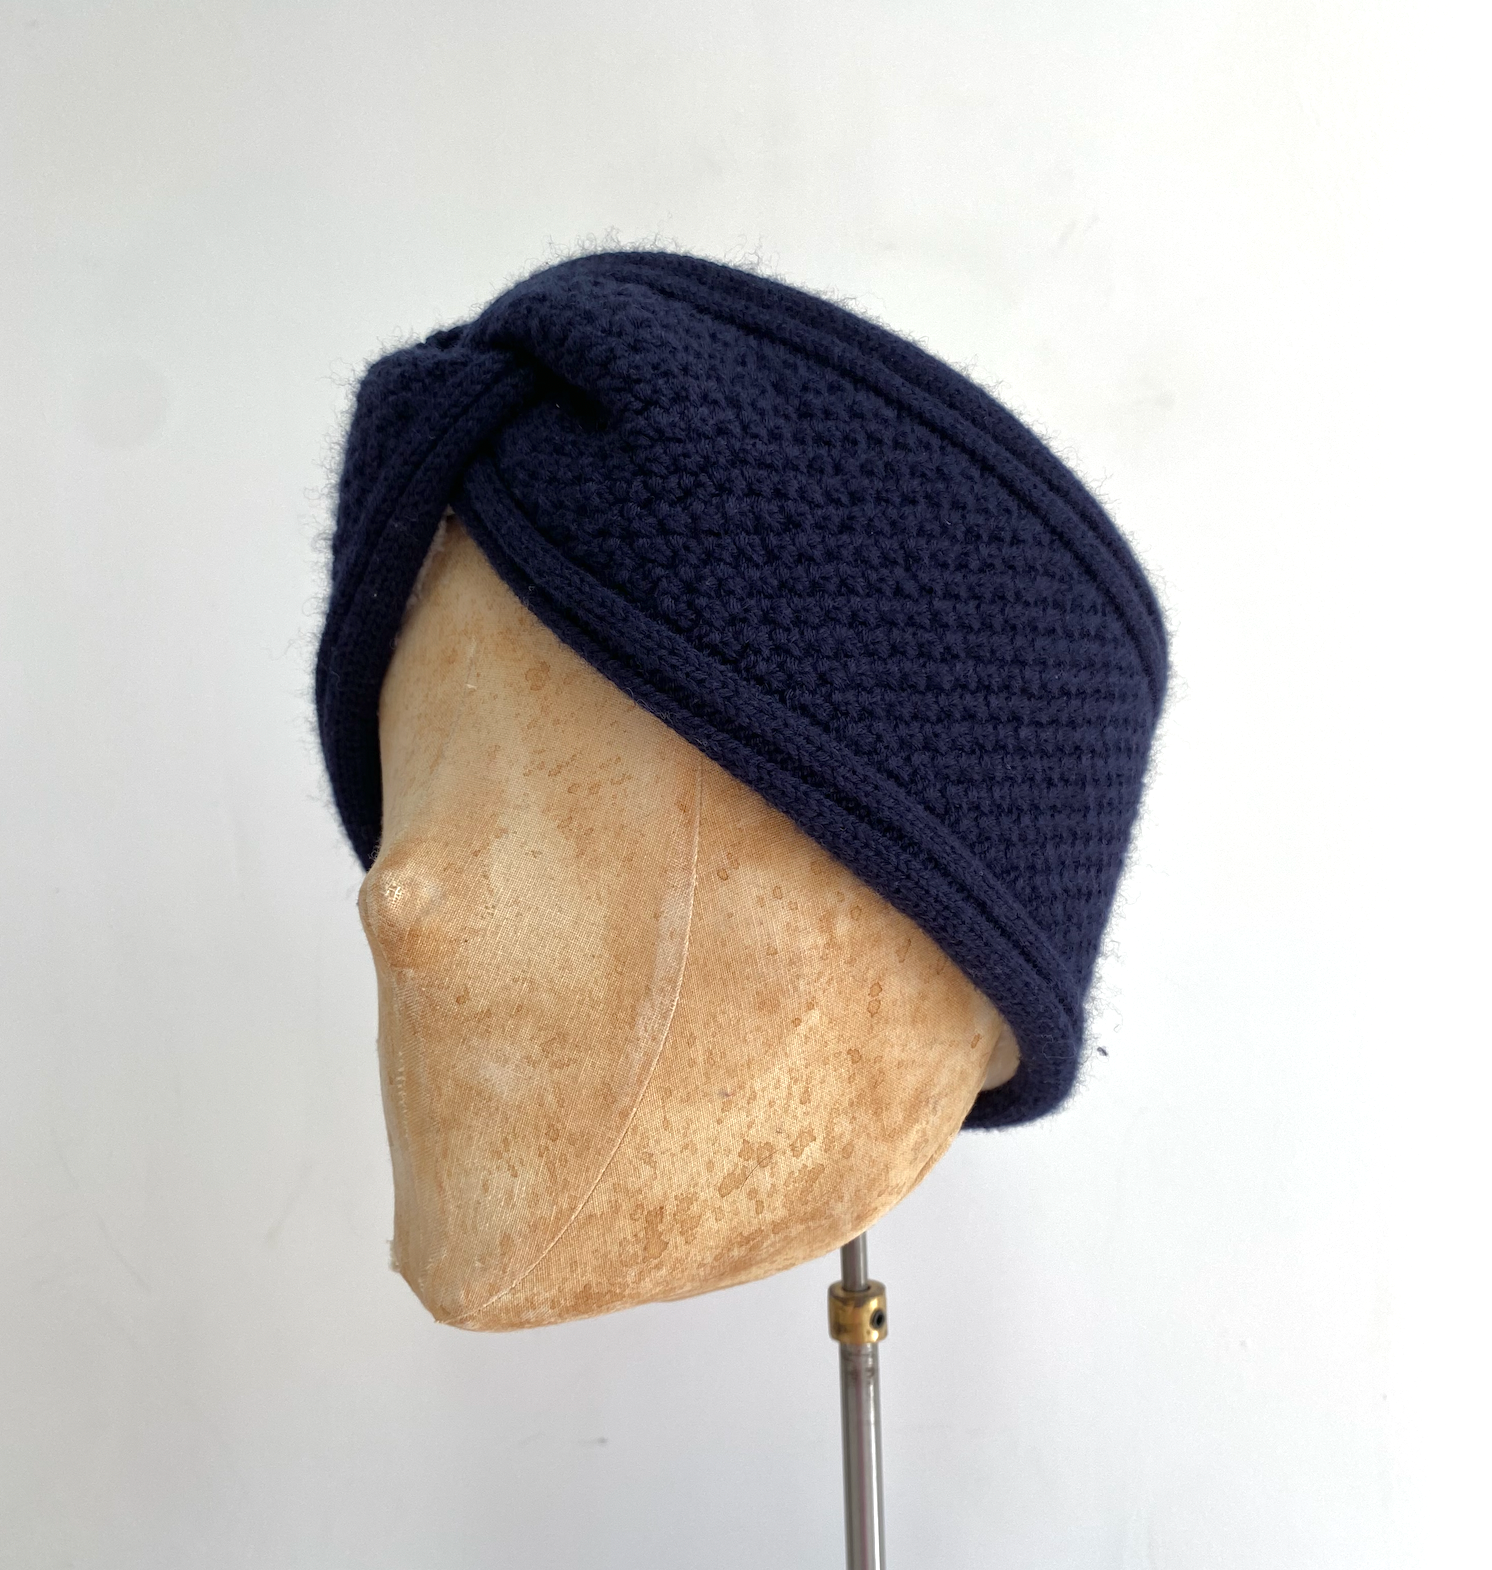 Knitted Navy Headband in Cashmere Mix Yarn